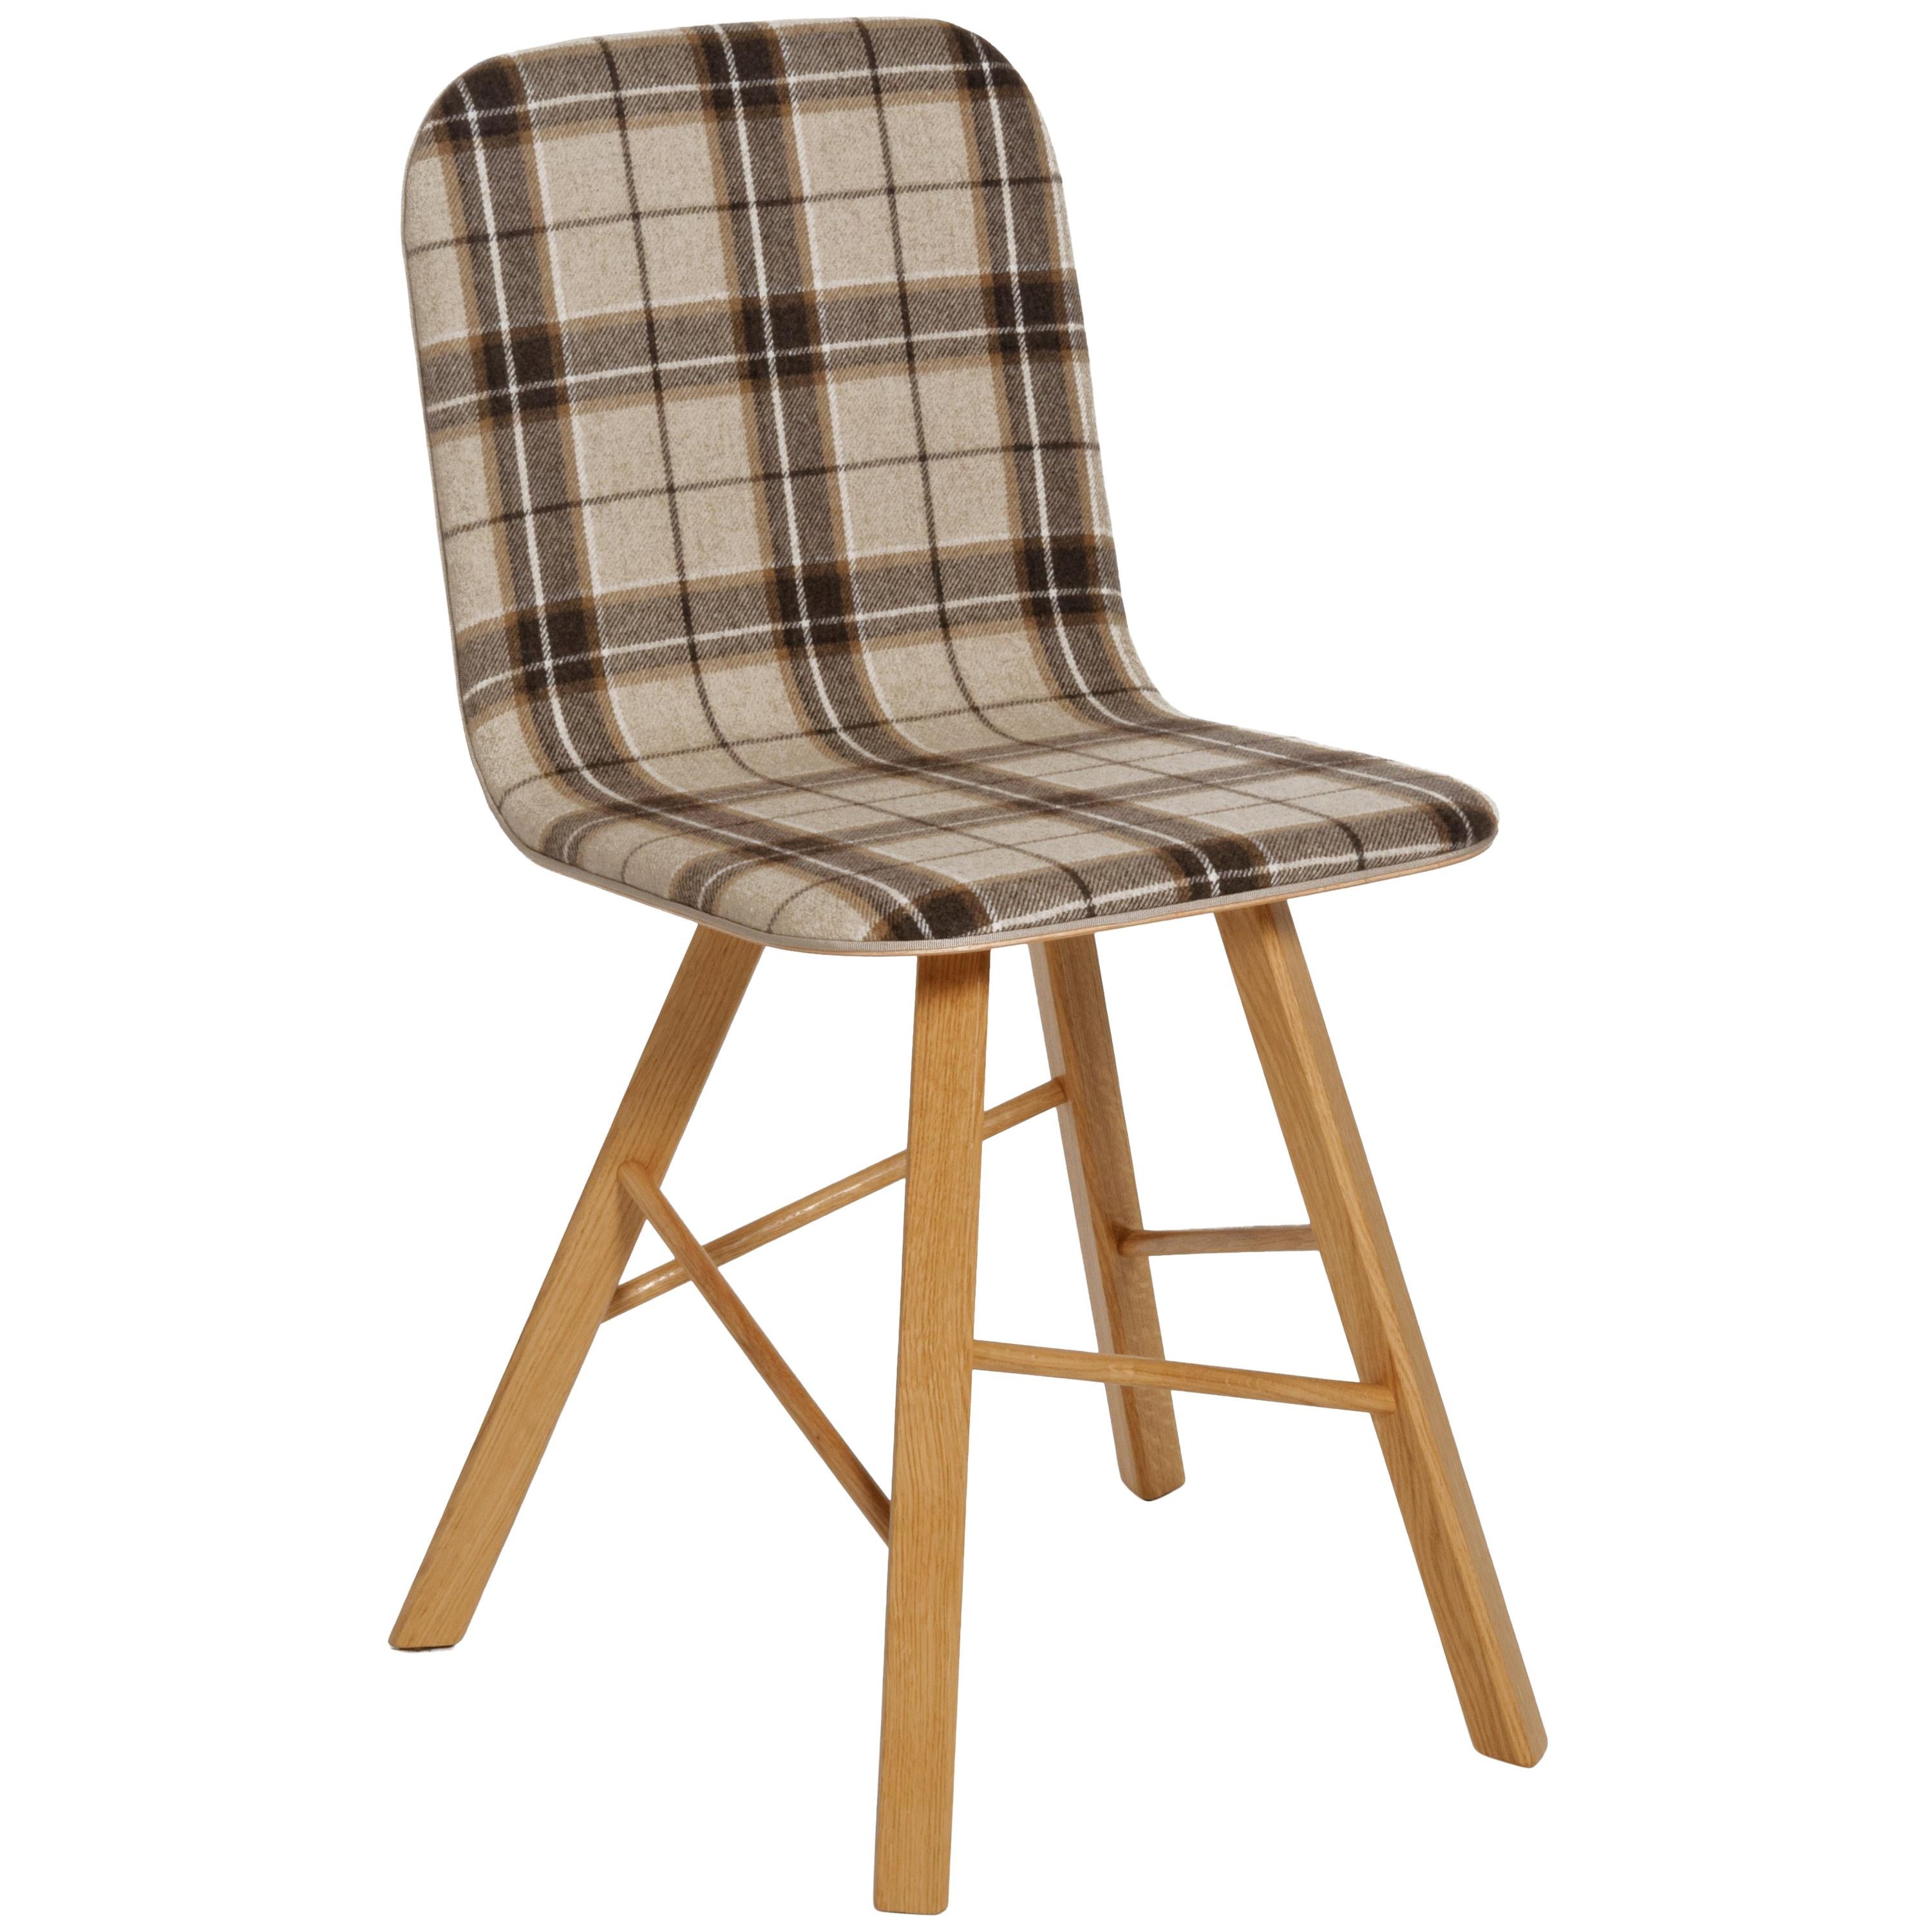 Tria Simple Chair by Colé Oak legs, Beige Tartan Seat , Minimalist Made in italy For Sale